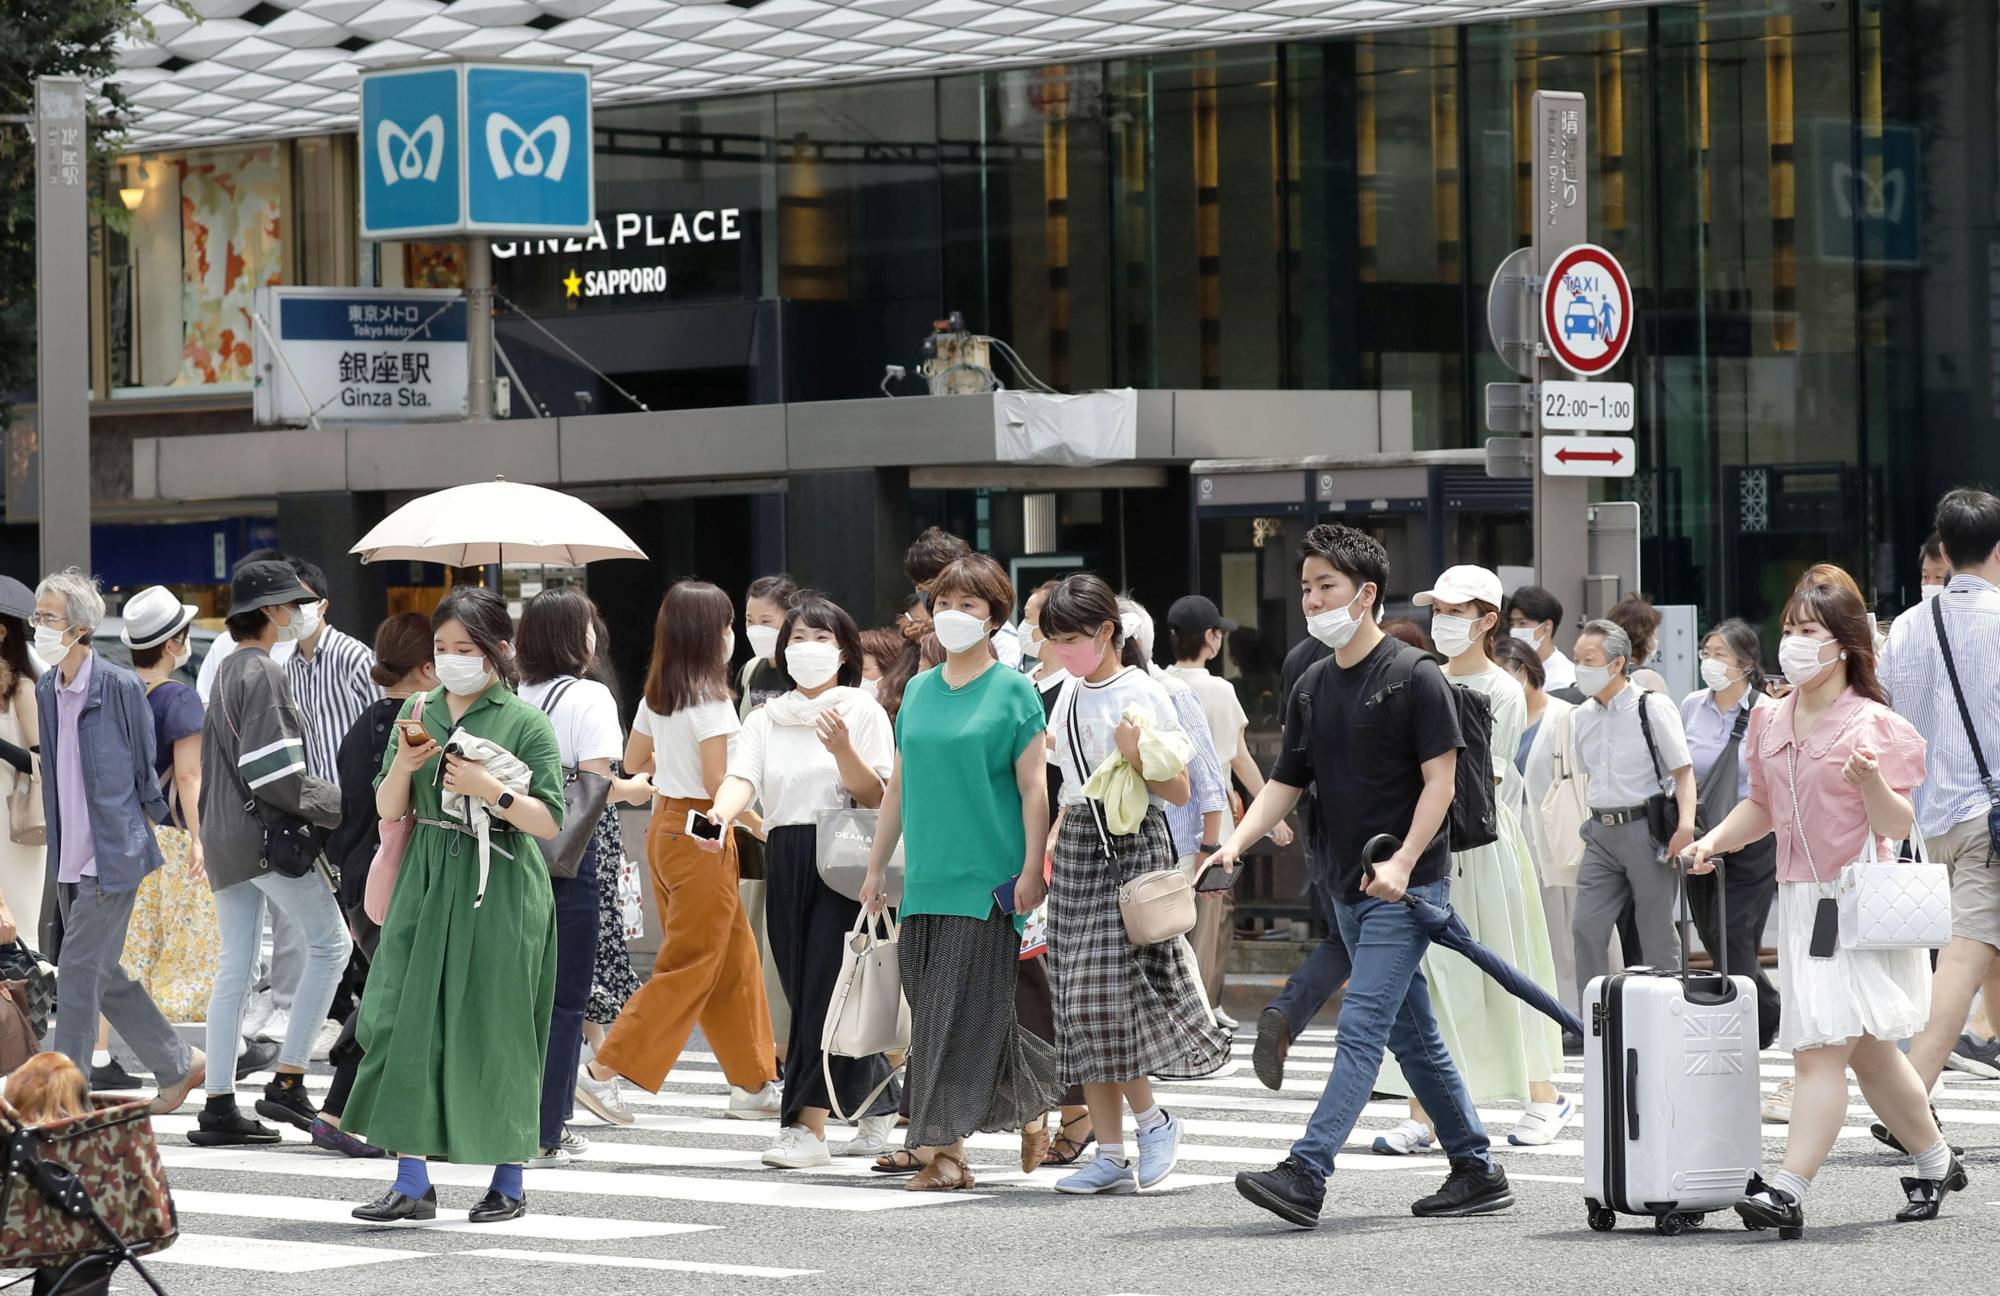 Japan's new COVID-19 cases top 186,000 as Tokyo reports record 31,878  infections - The Japan Times